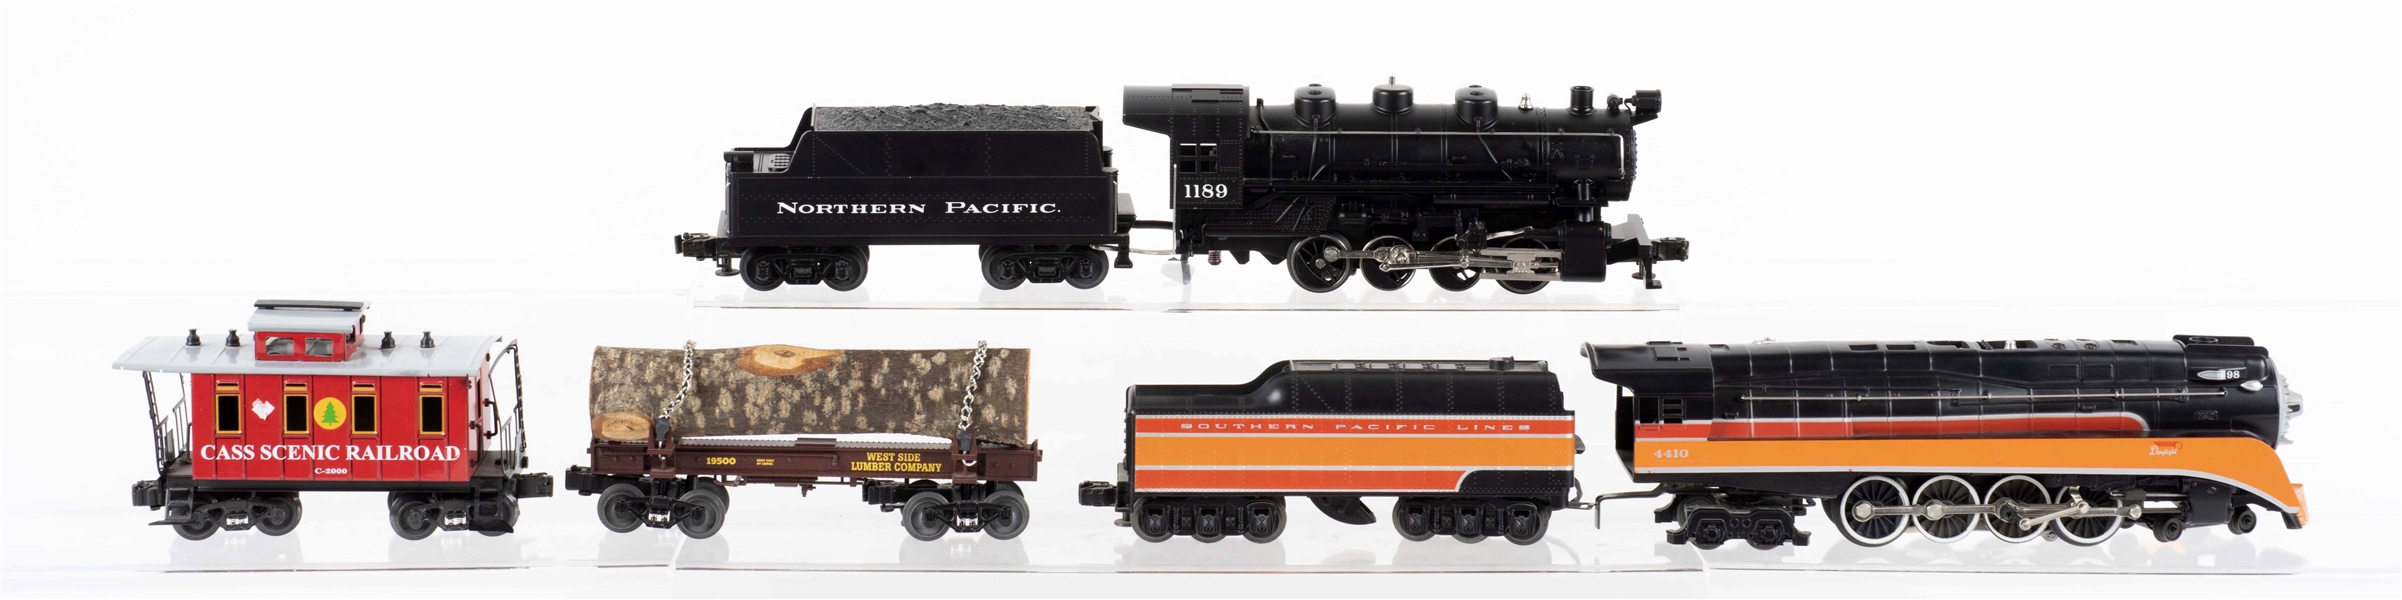 LOT OF 6: 1189,4410, CASS SCENIC RAIL ROAD TRAINS. 